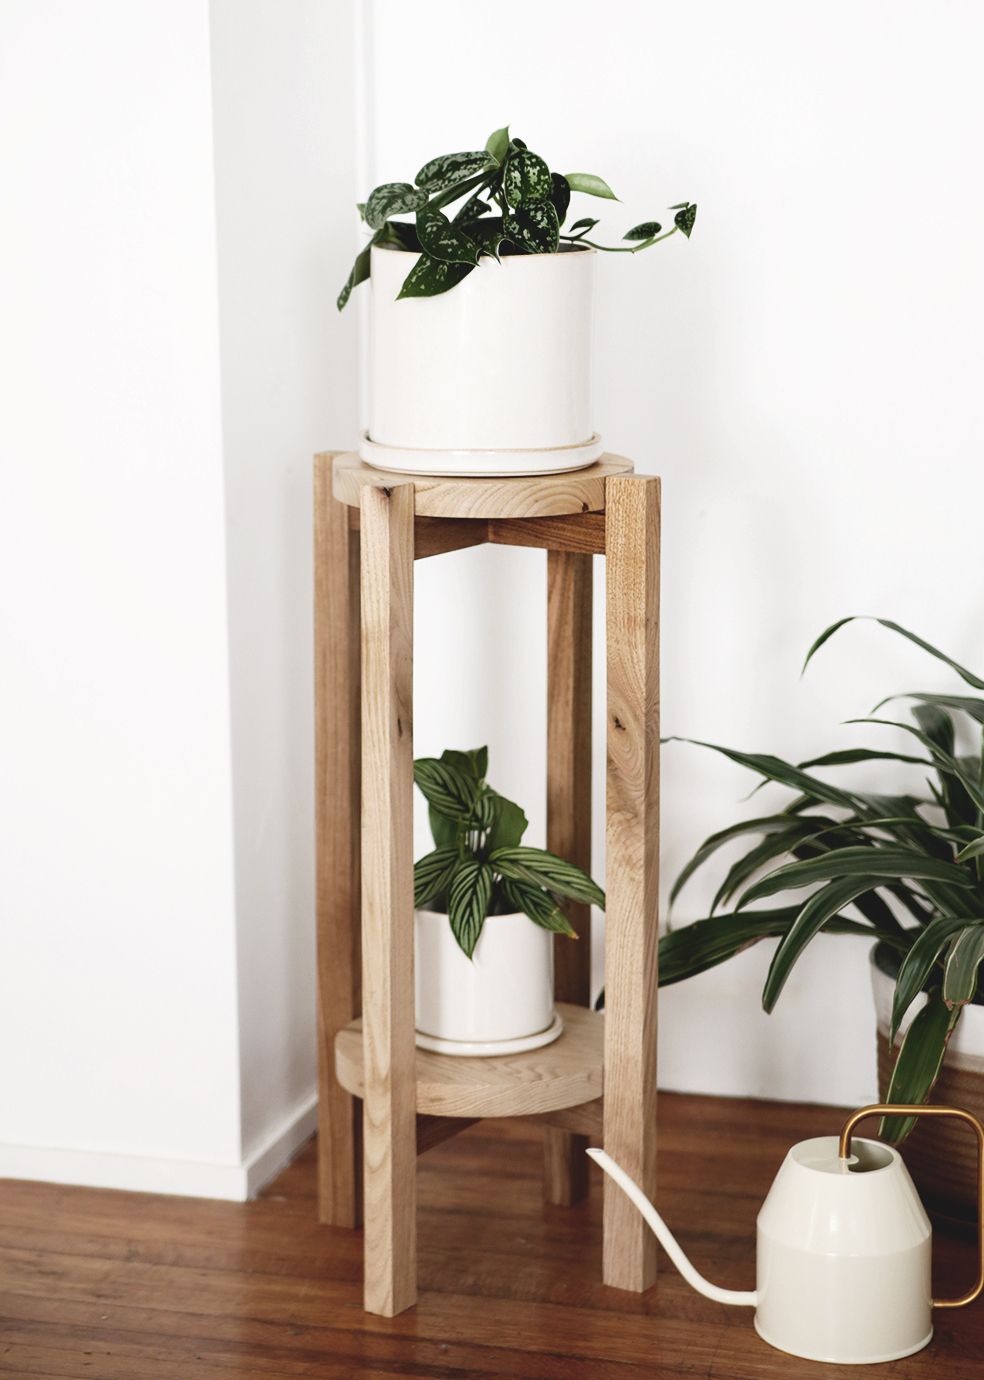 Diy Wood Plant Stand – A Simple Diy With A Video Tutorial With Regard To Wood Plant Stands (View 6 of 15)